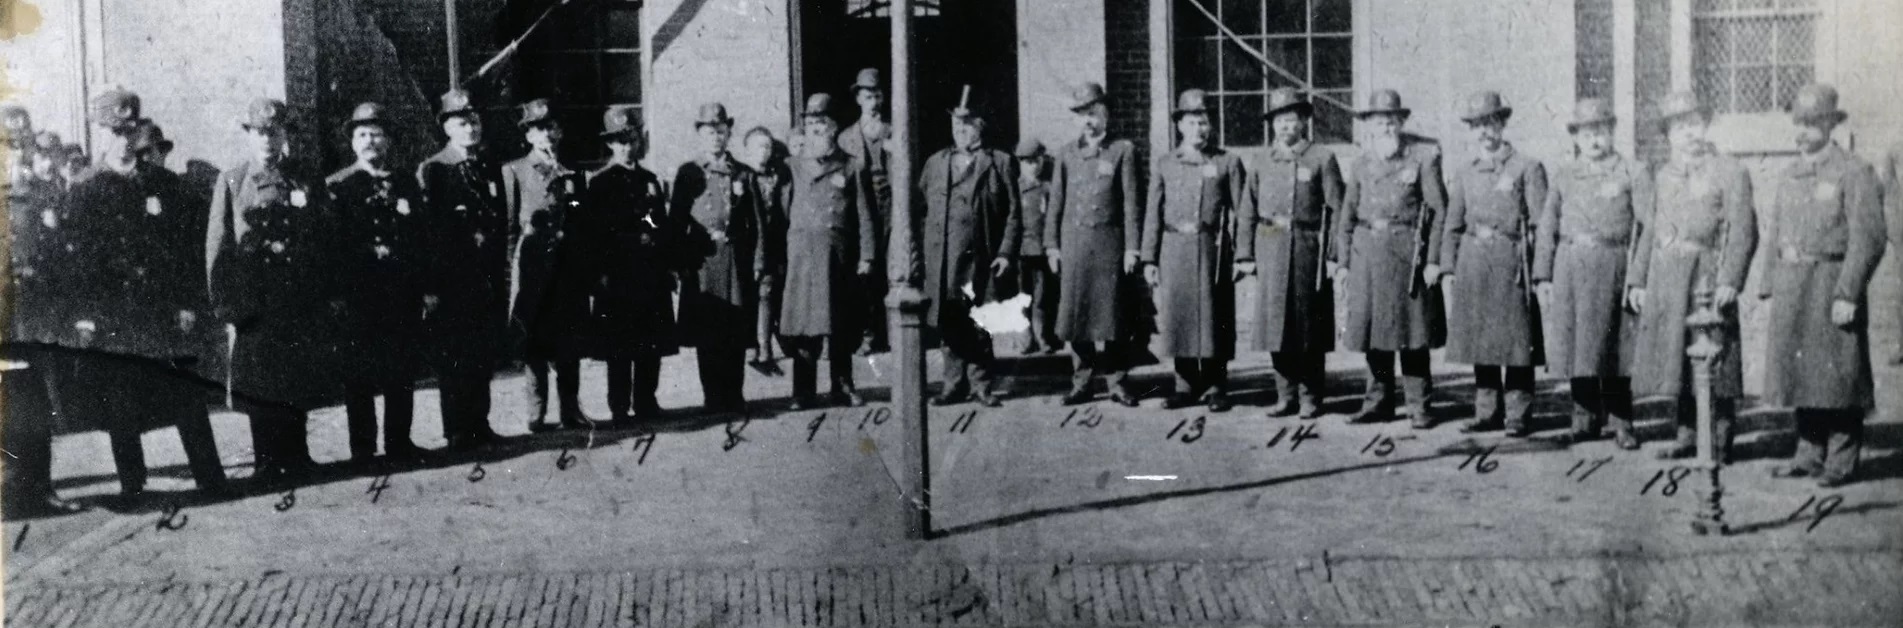 A black and white photo of men in police uniforms standing in a single line in front of a brick building